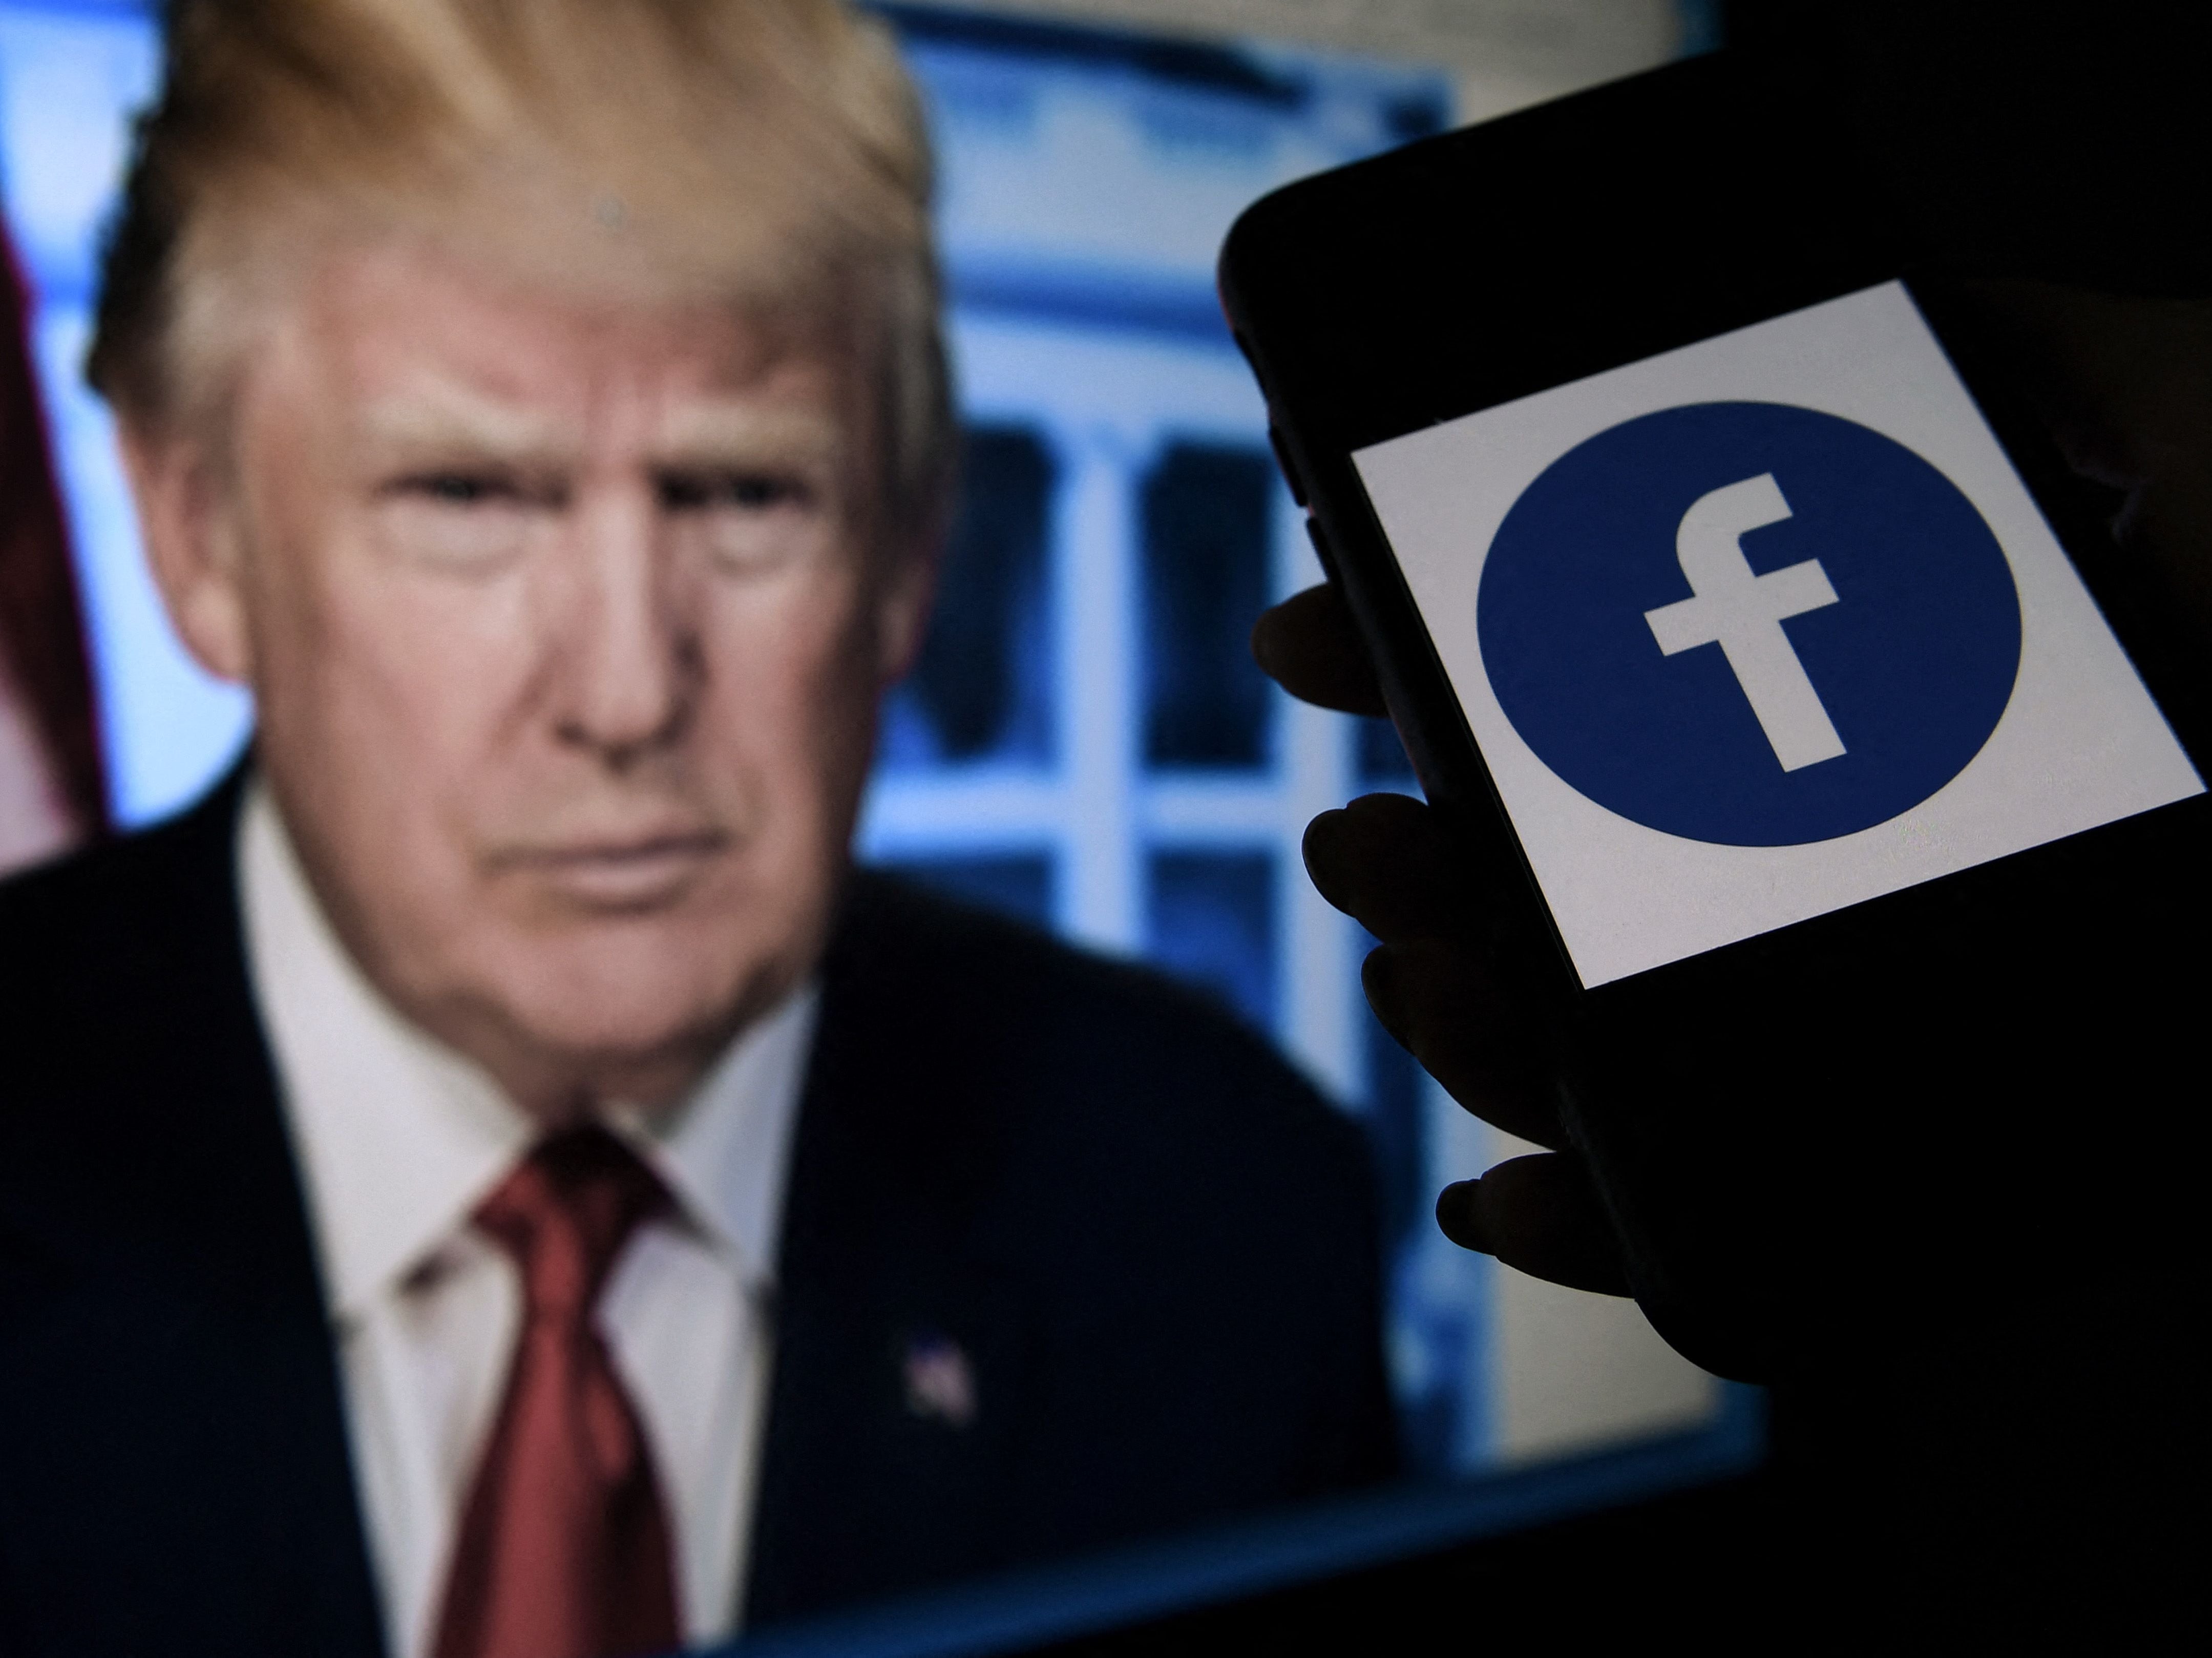 Donald Trump was banned from Facebook in the wake of the US Capitol attack